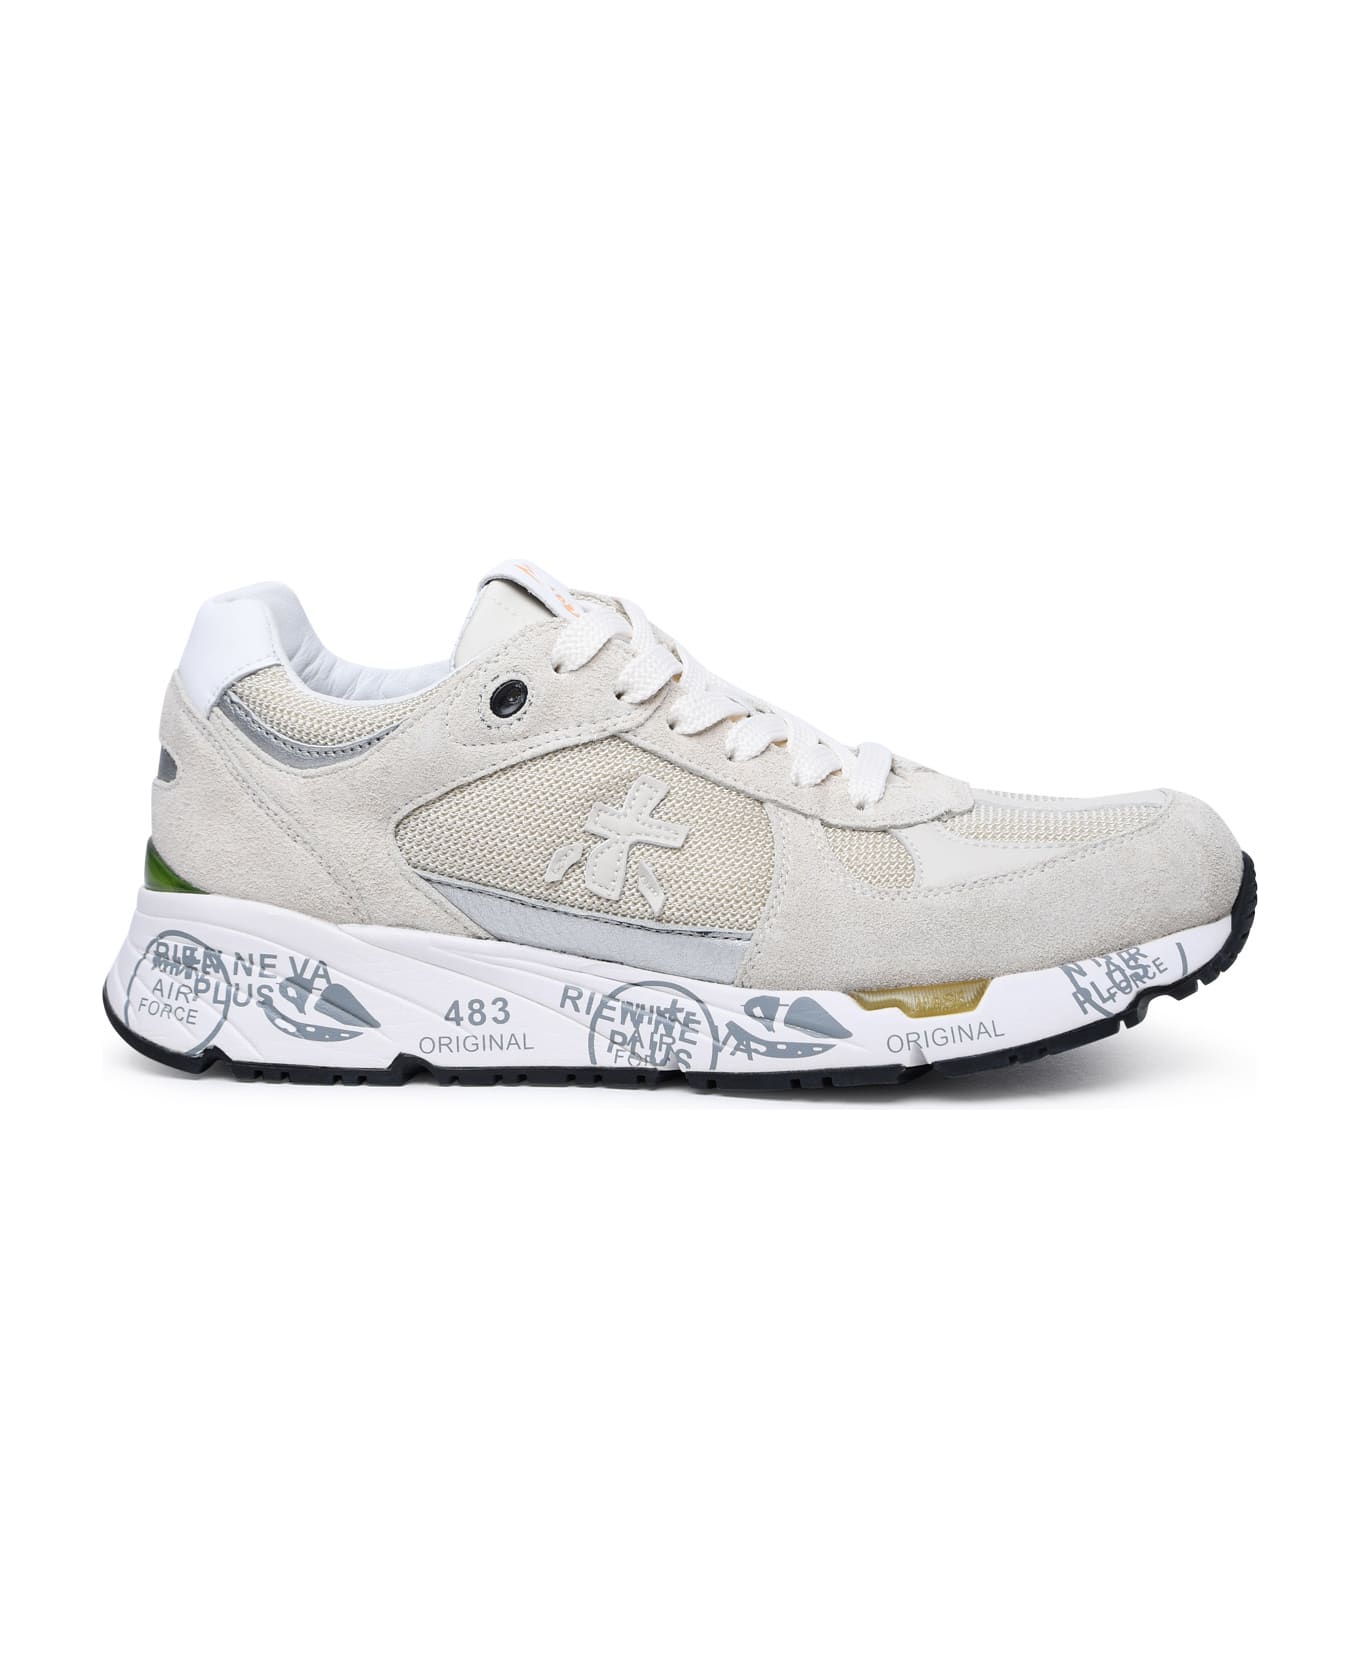 Premiata 'mase' Sneakers In Leather And Cream Fabric - Beige スニーカー